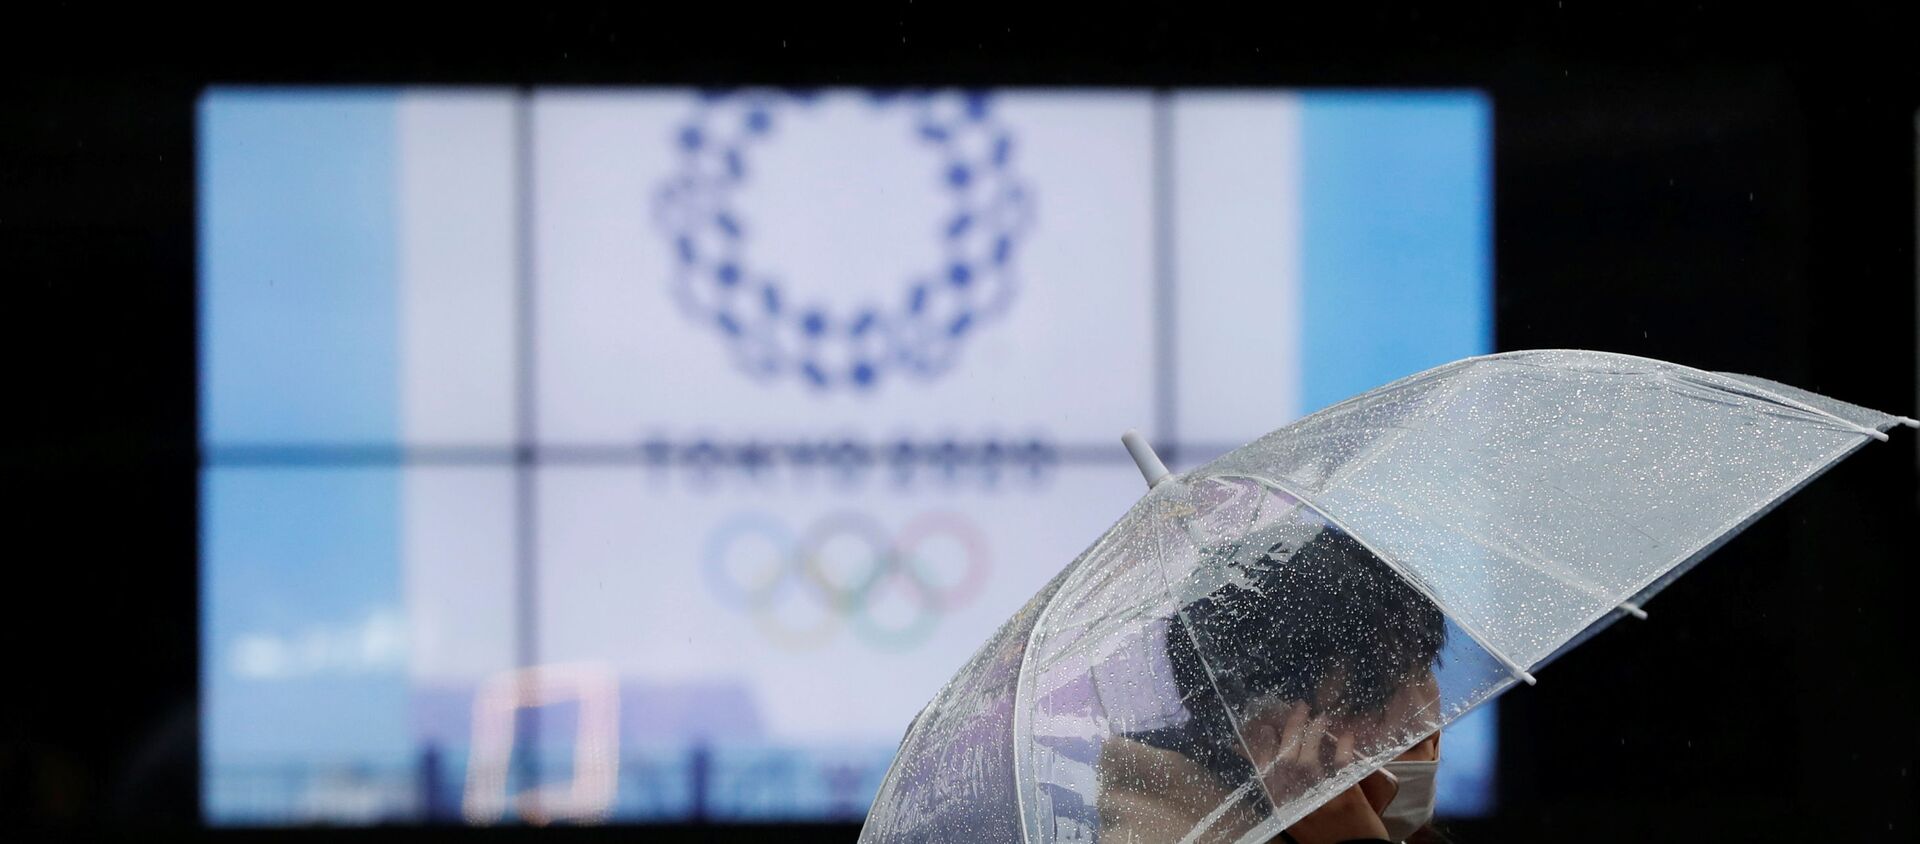 A passerby wearing a protective face mask walks past a display showing the logo of Tokyo 2020 Olympic Games that have been postponed to 2021 due to the coronavirus disease (COVID-19) outbreak, in Tokyo, Japan January 23, 2021. - 俄羅斯衛星通訊社, 1920, 03.03.2021